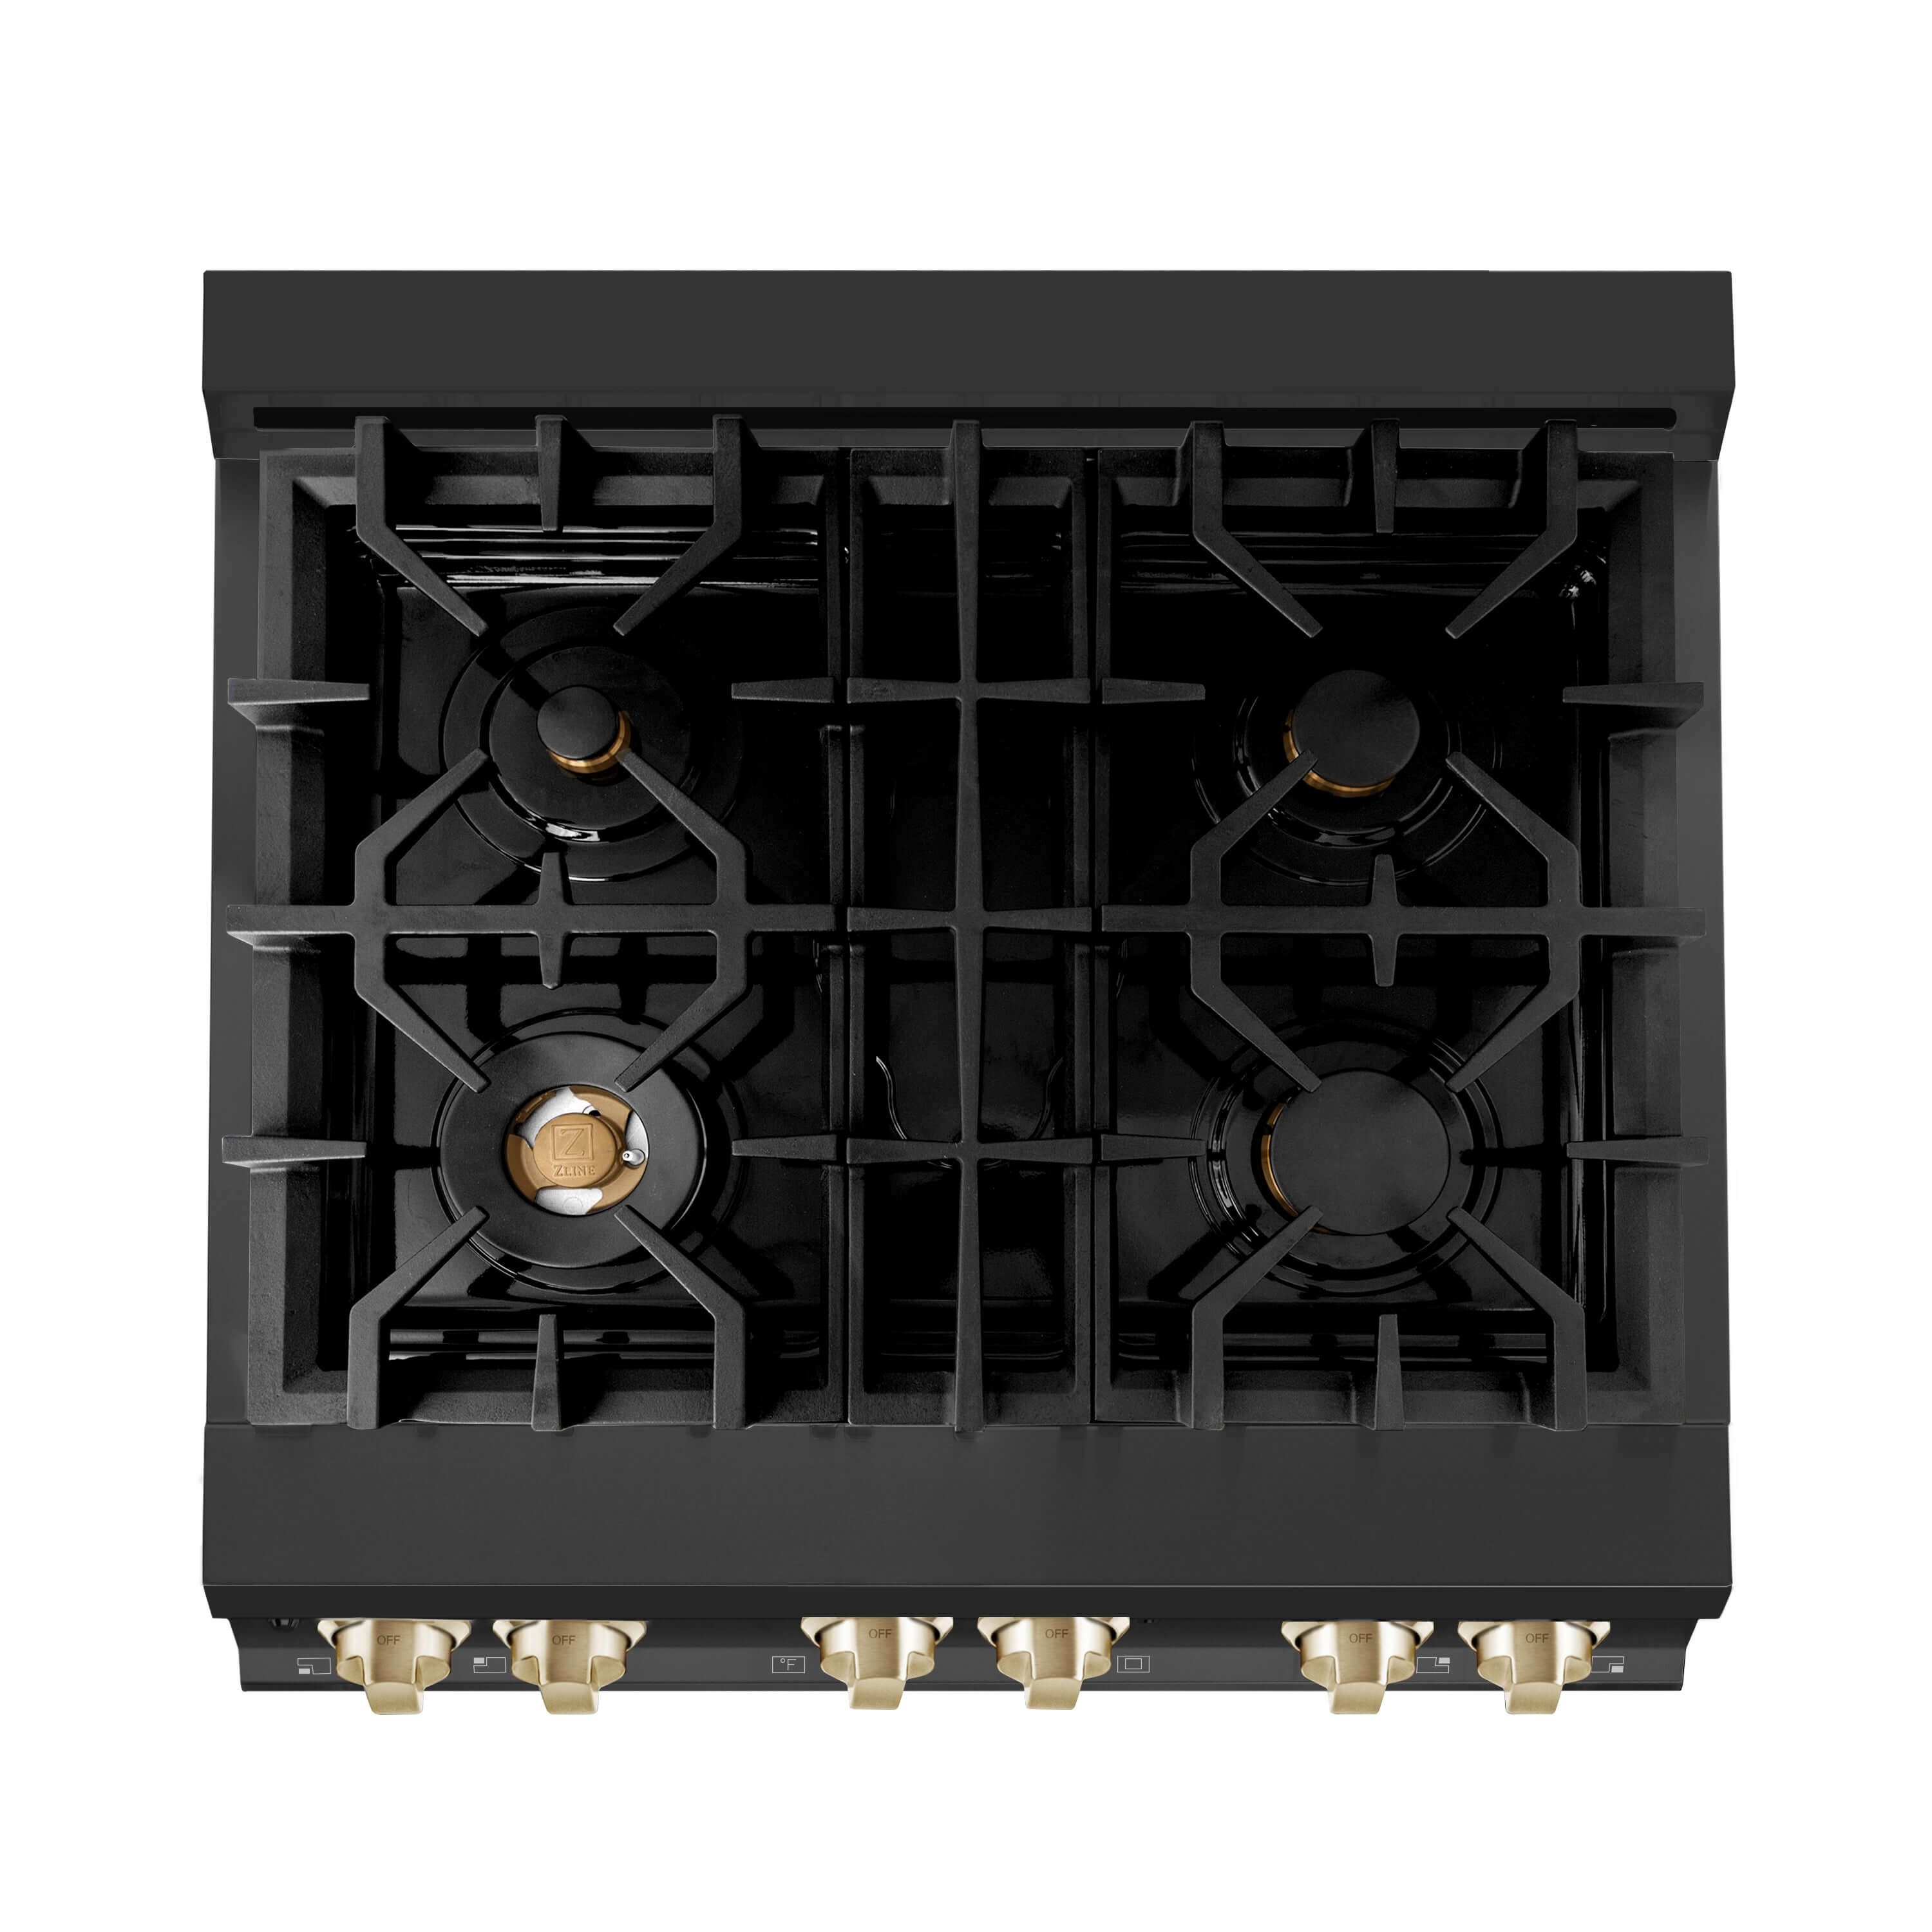 ZLINE Autograph Edition 30" Black Stainless Steel Range from above, showing 4-burner gas cooktop with brass burners.